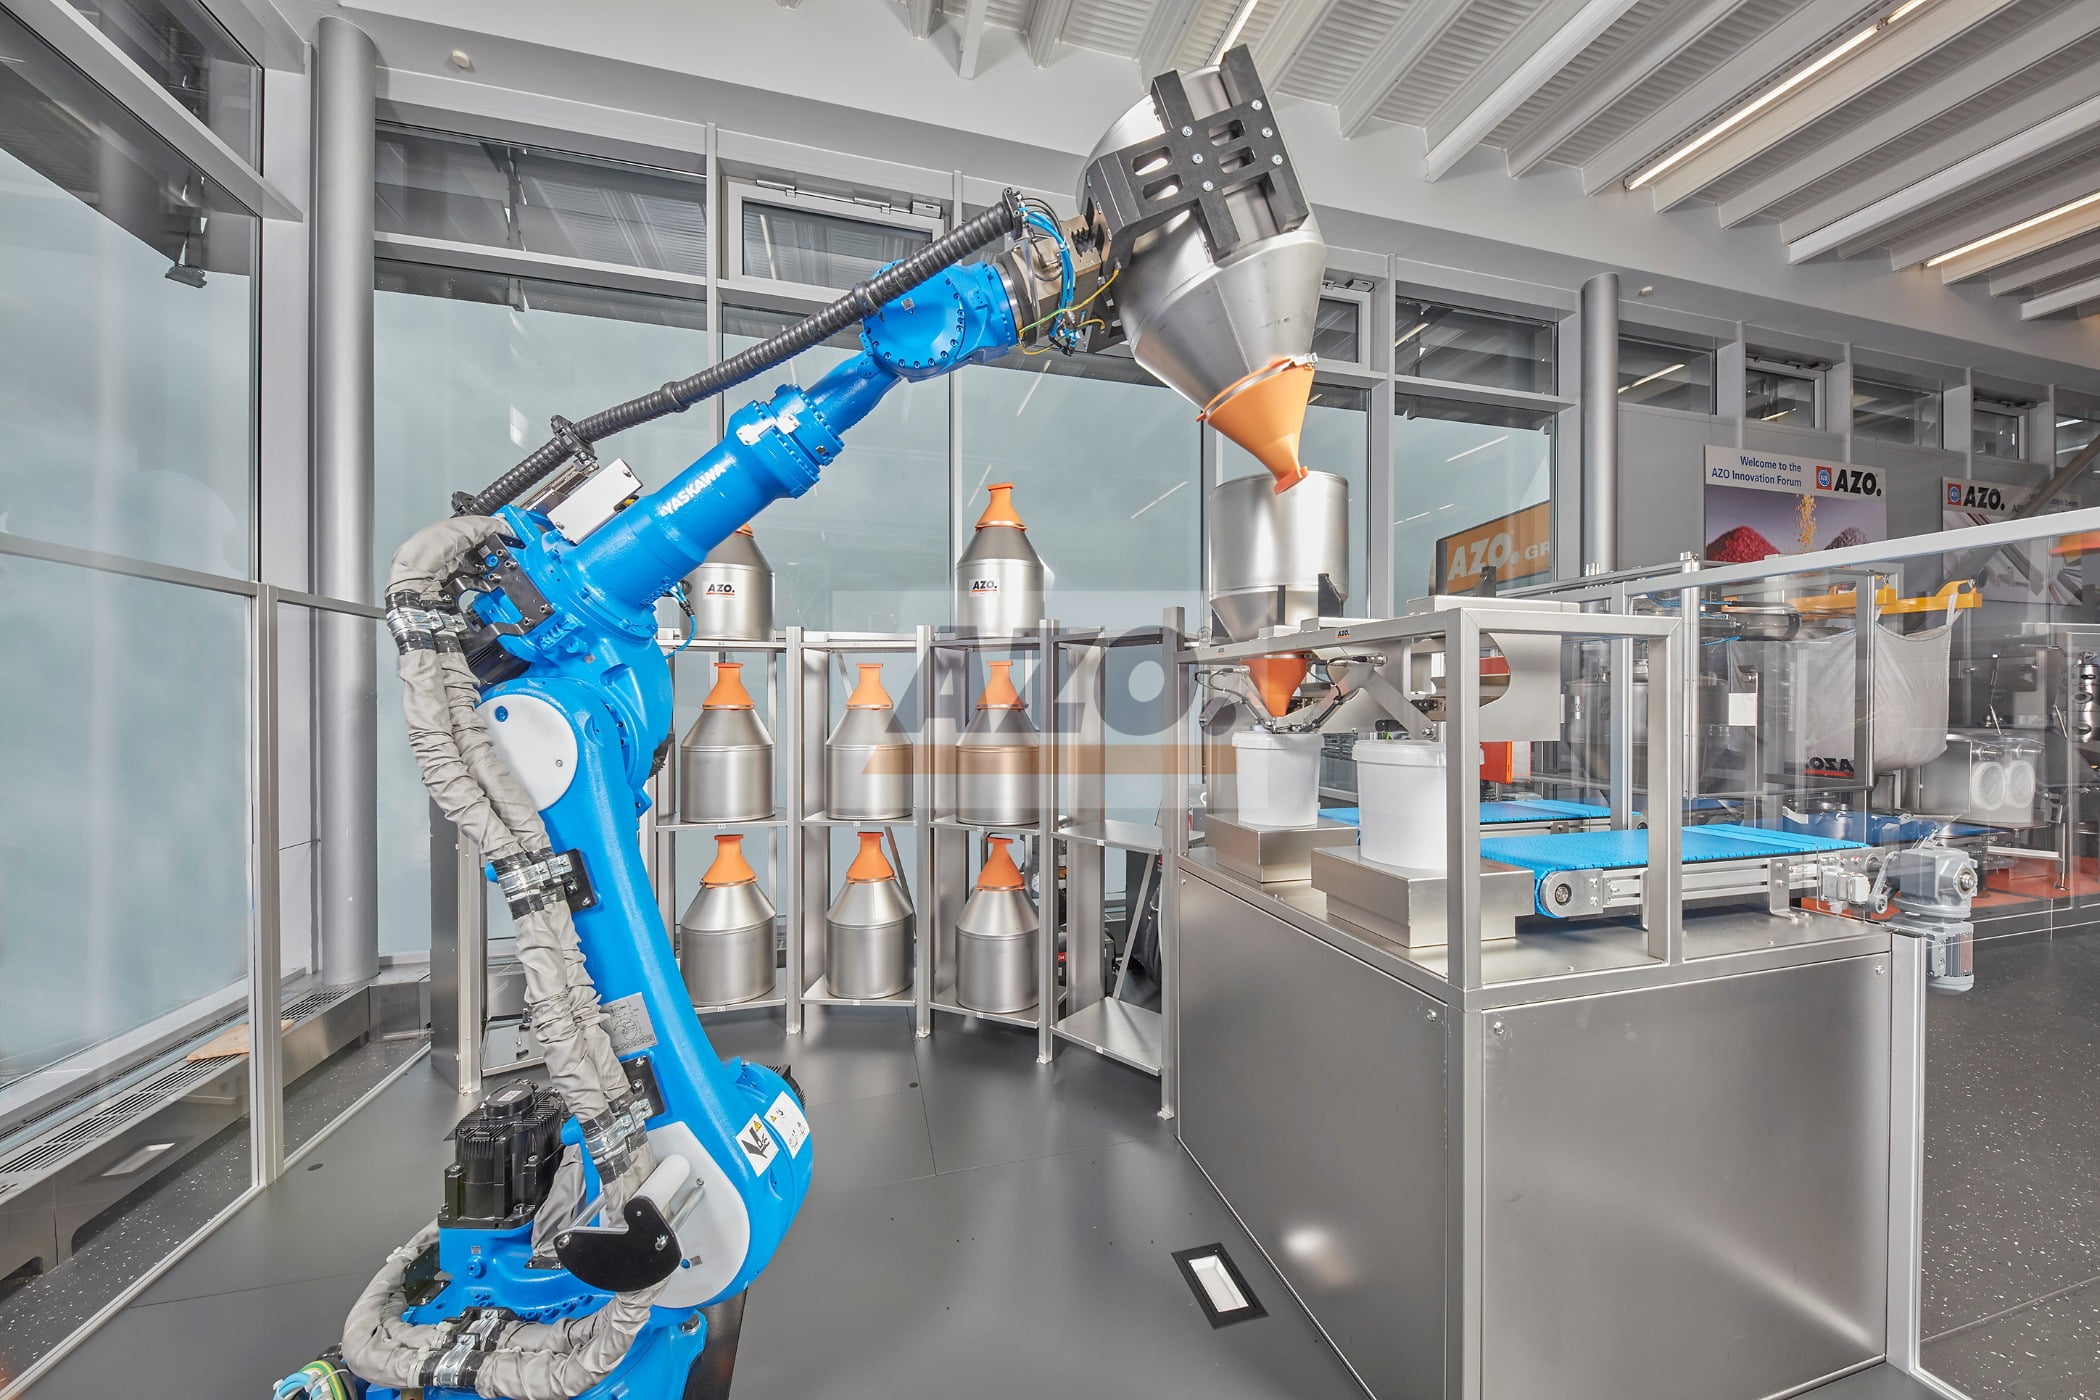 Production line, Interior, Factory, Industrial, Machine, Robot arm